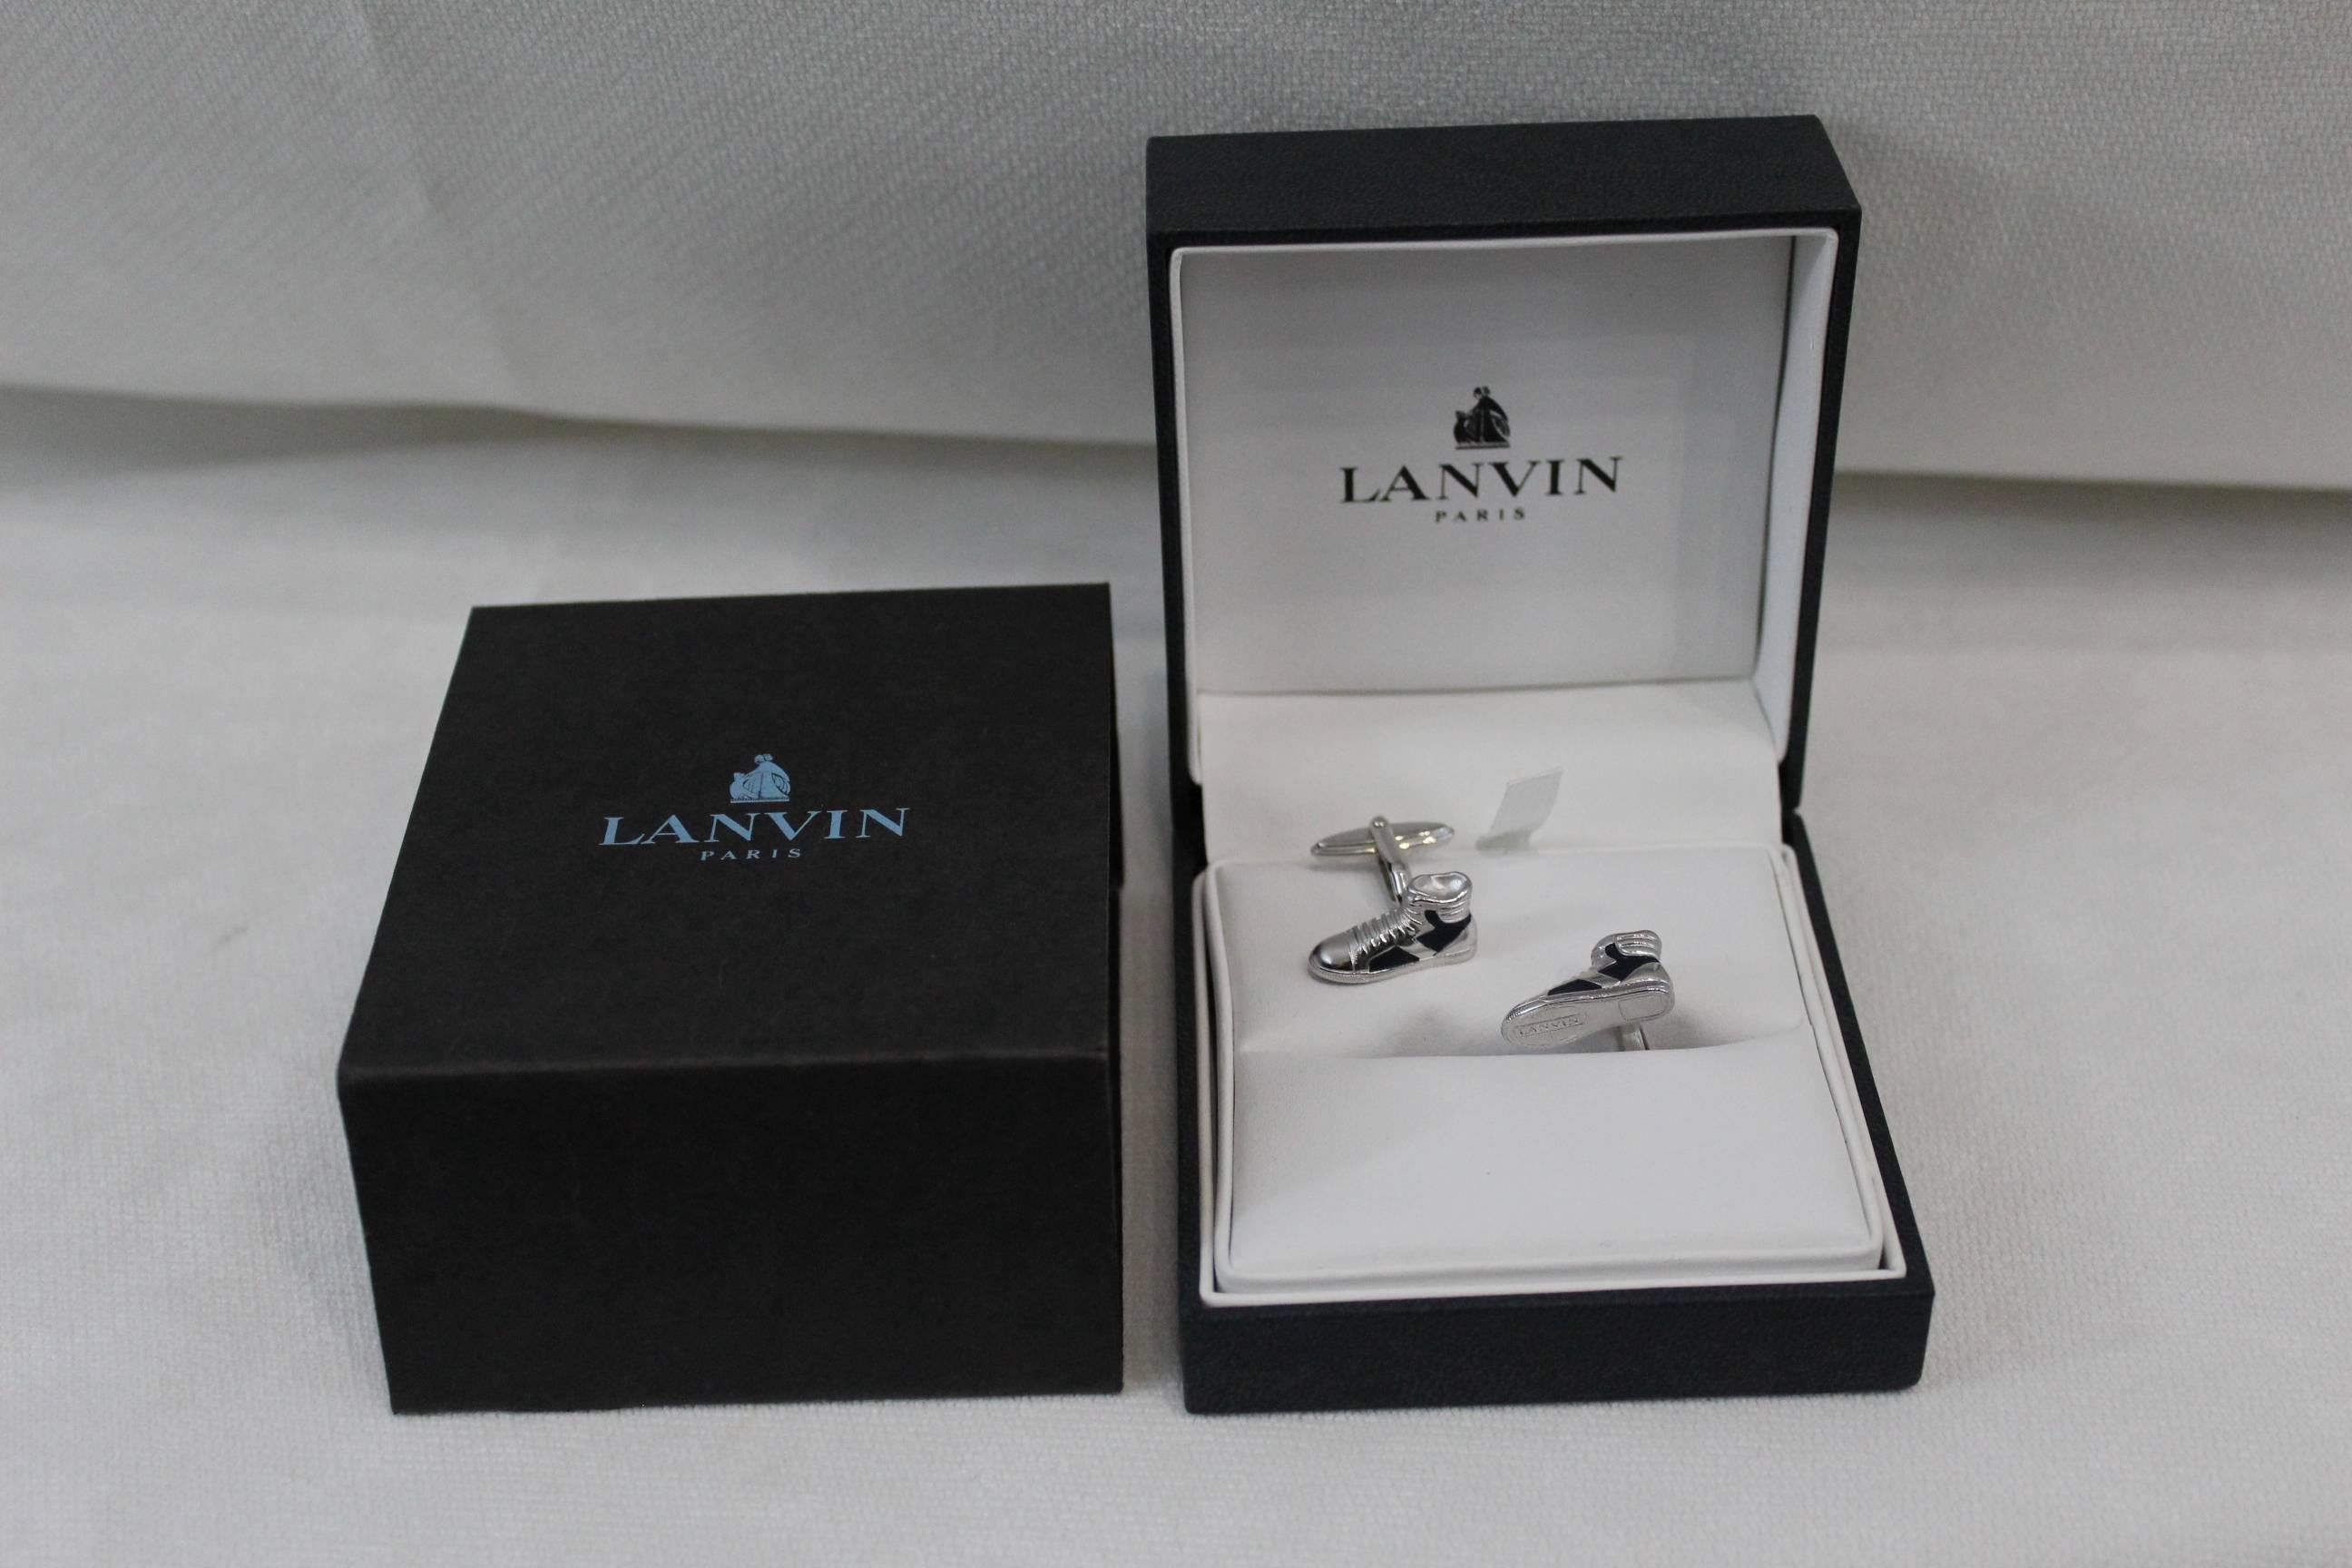 Super cute Lanvin Cufflinks, new never used in box.
Representing a pair of ssneackers iconoic of the brand.